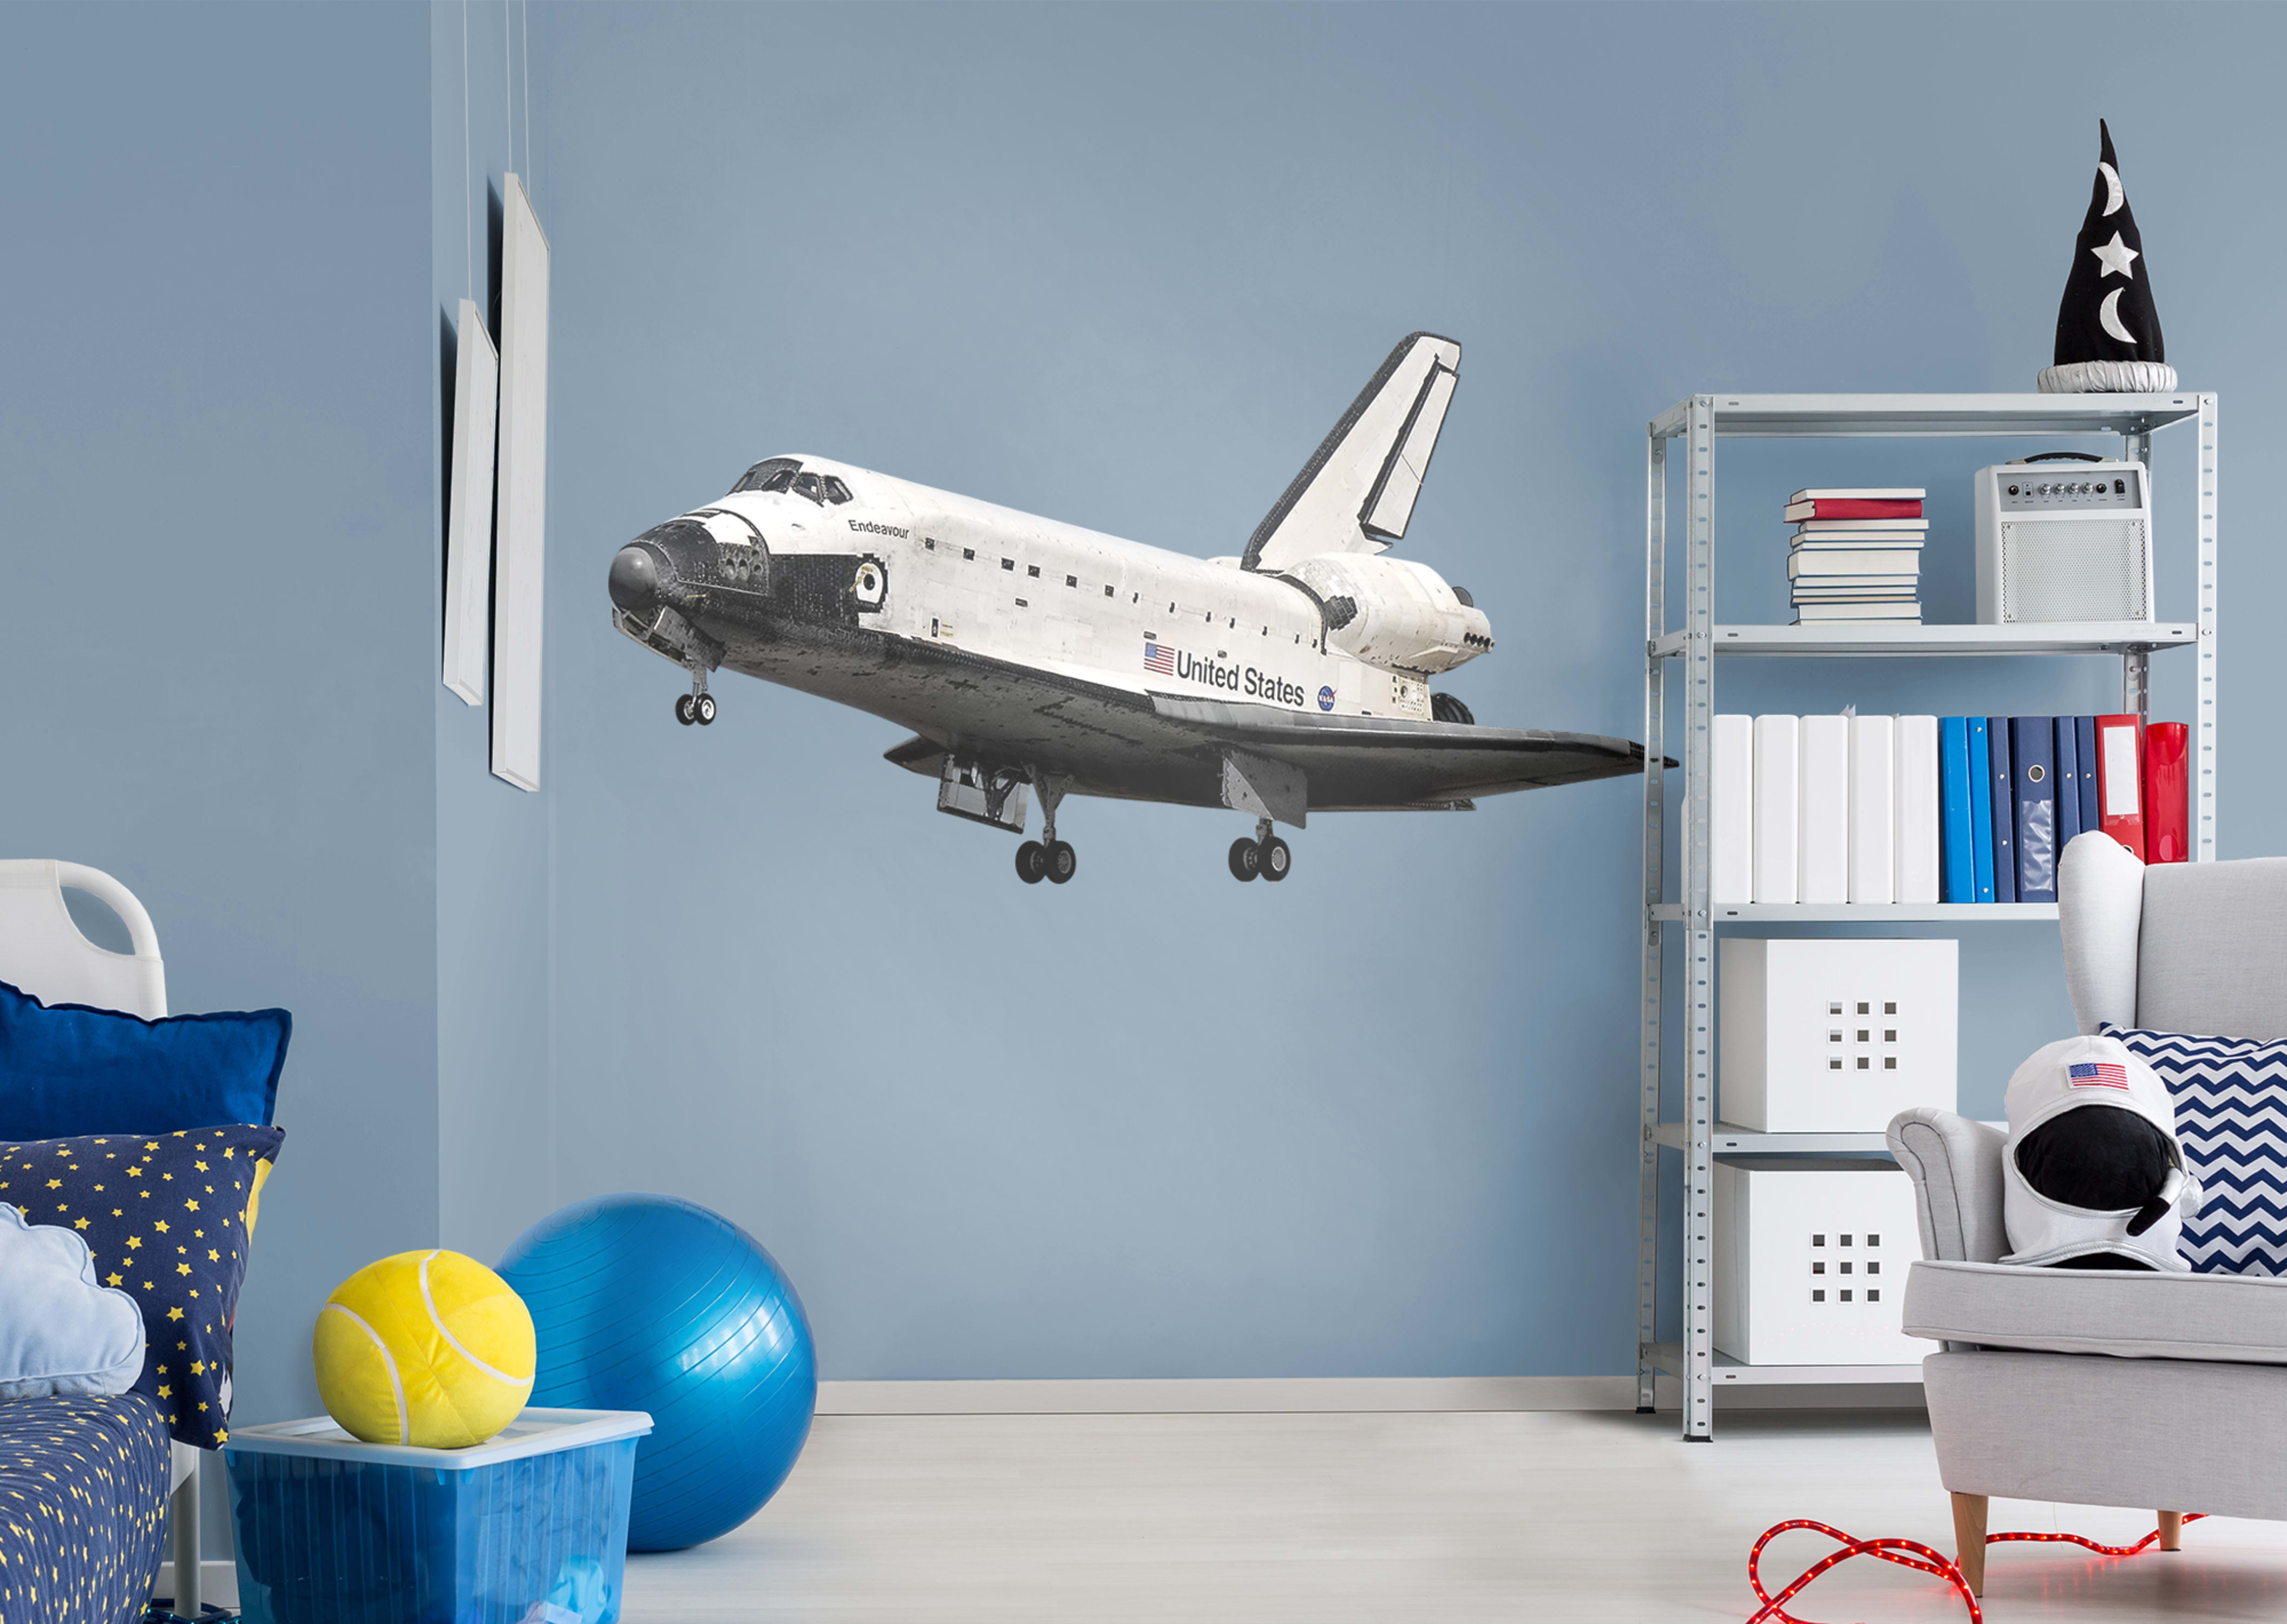 Space Shuttle Endeavor Wall Decal | Shop Fathead® for Space ...